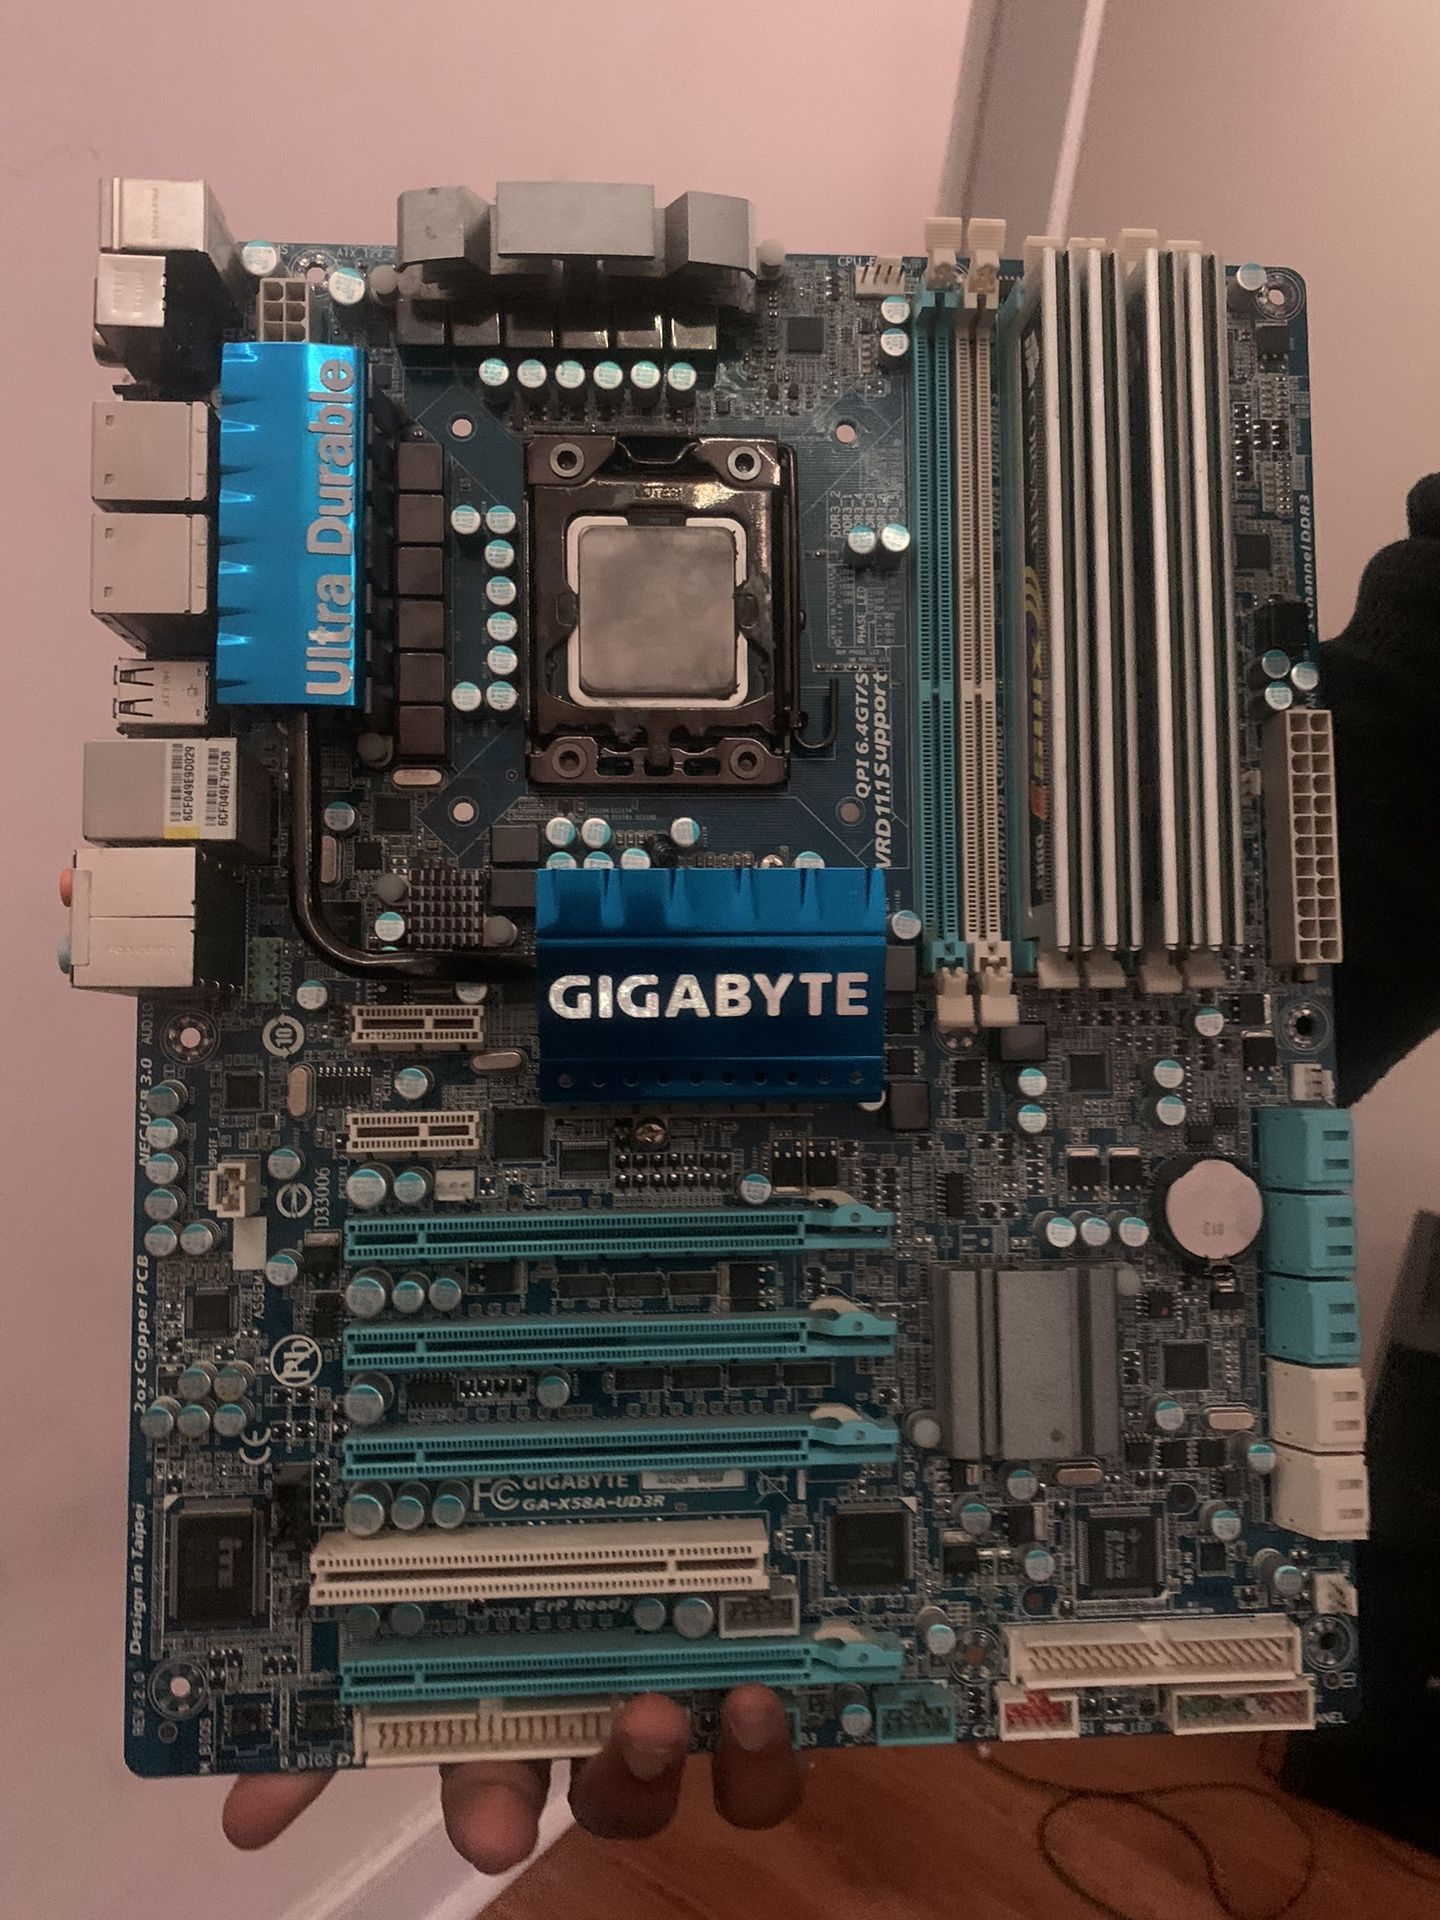 850 Wats Power Supply And Gigabyte Mother Board 